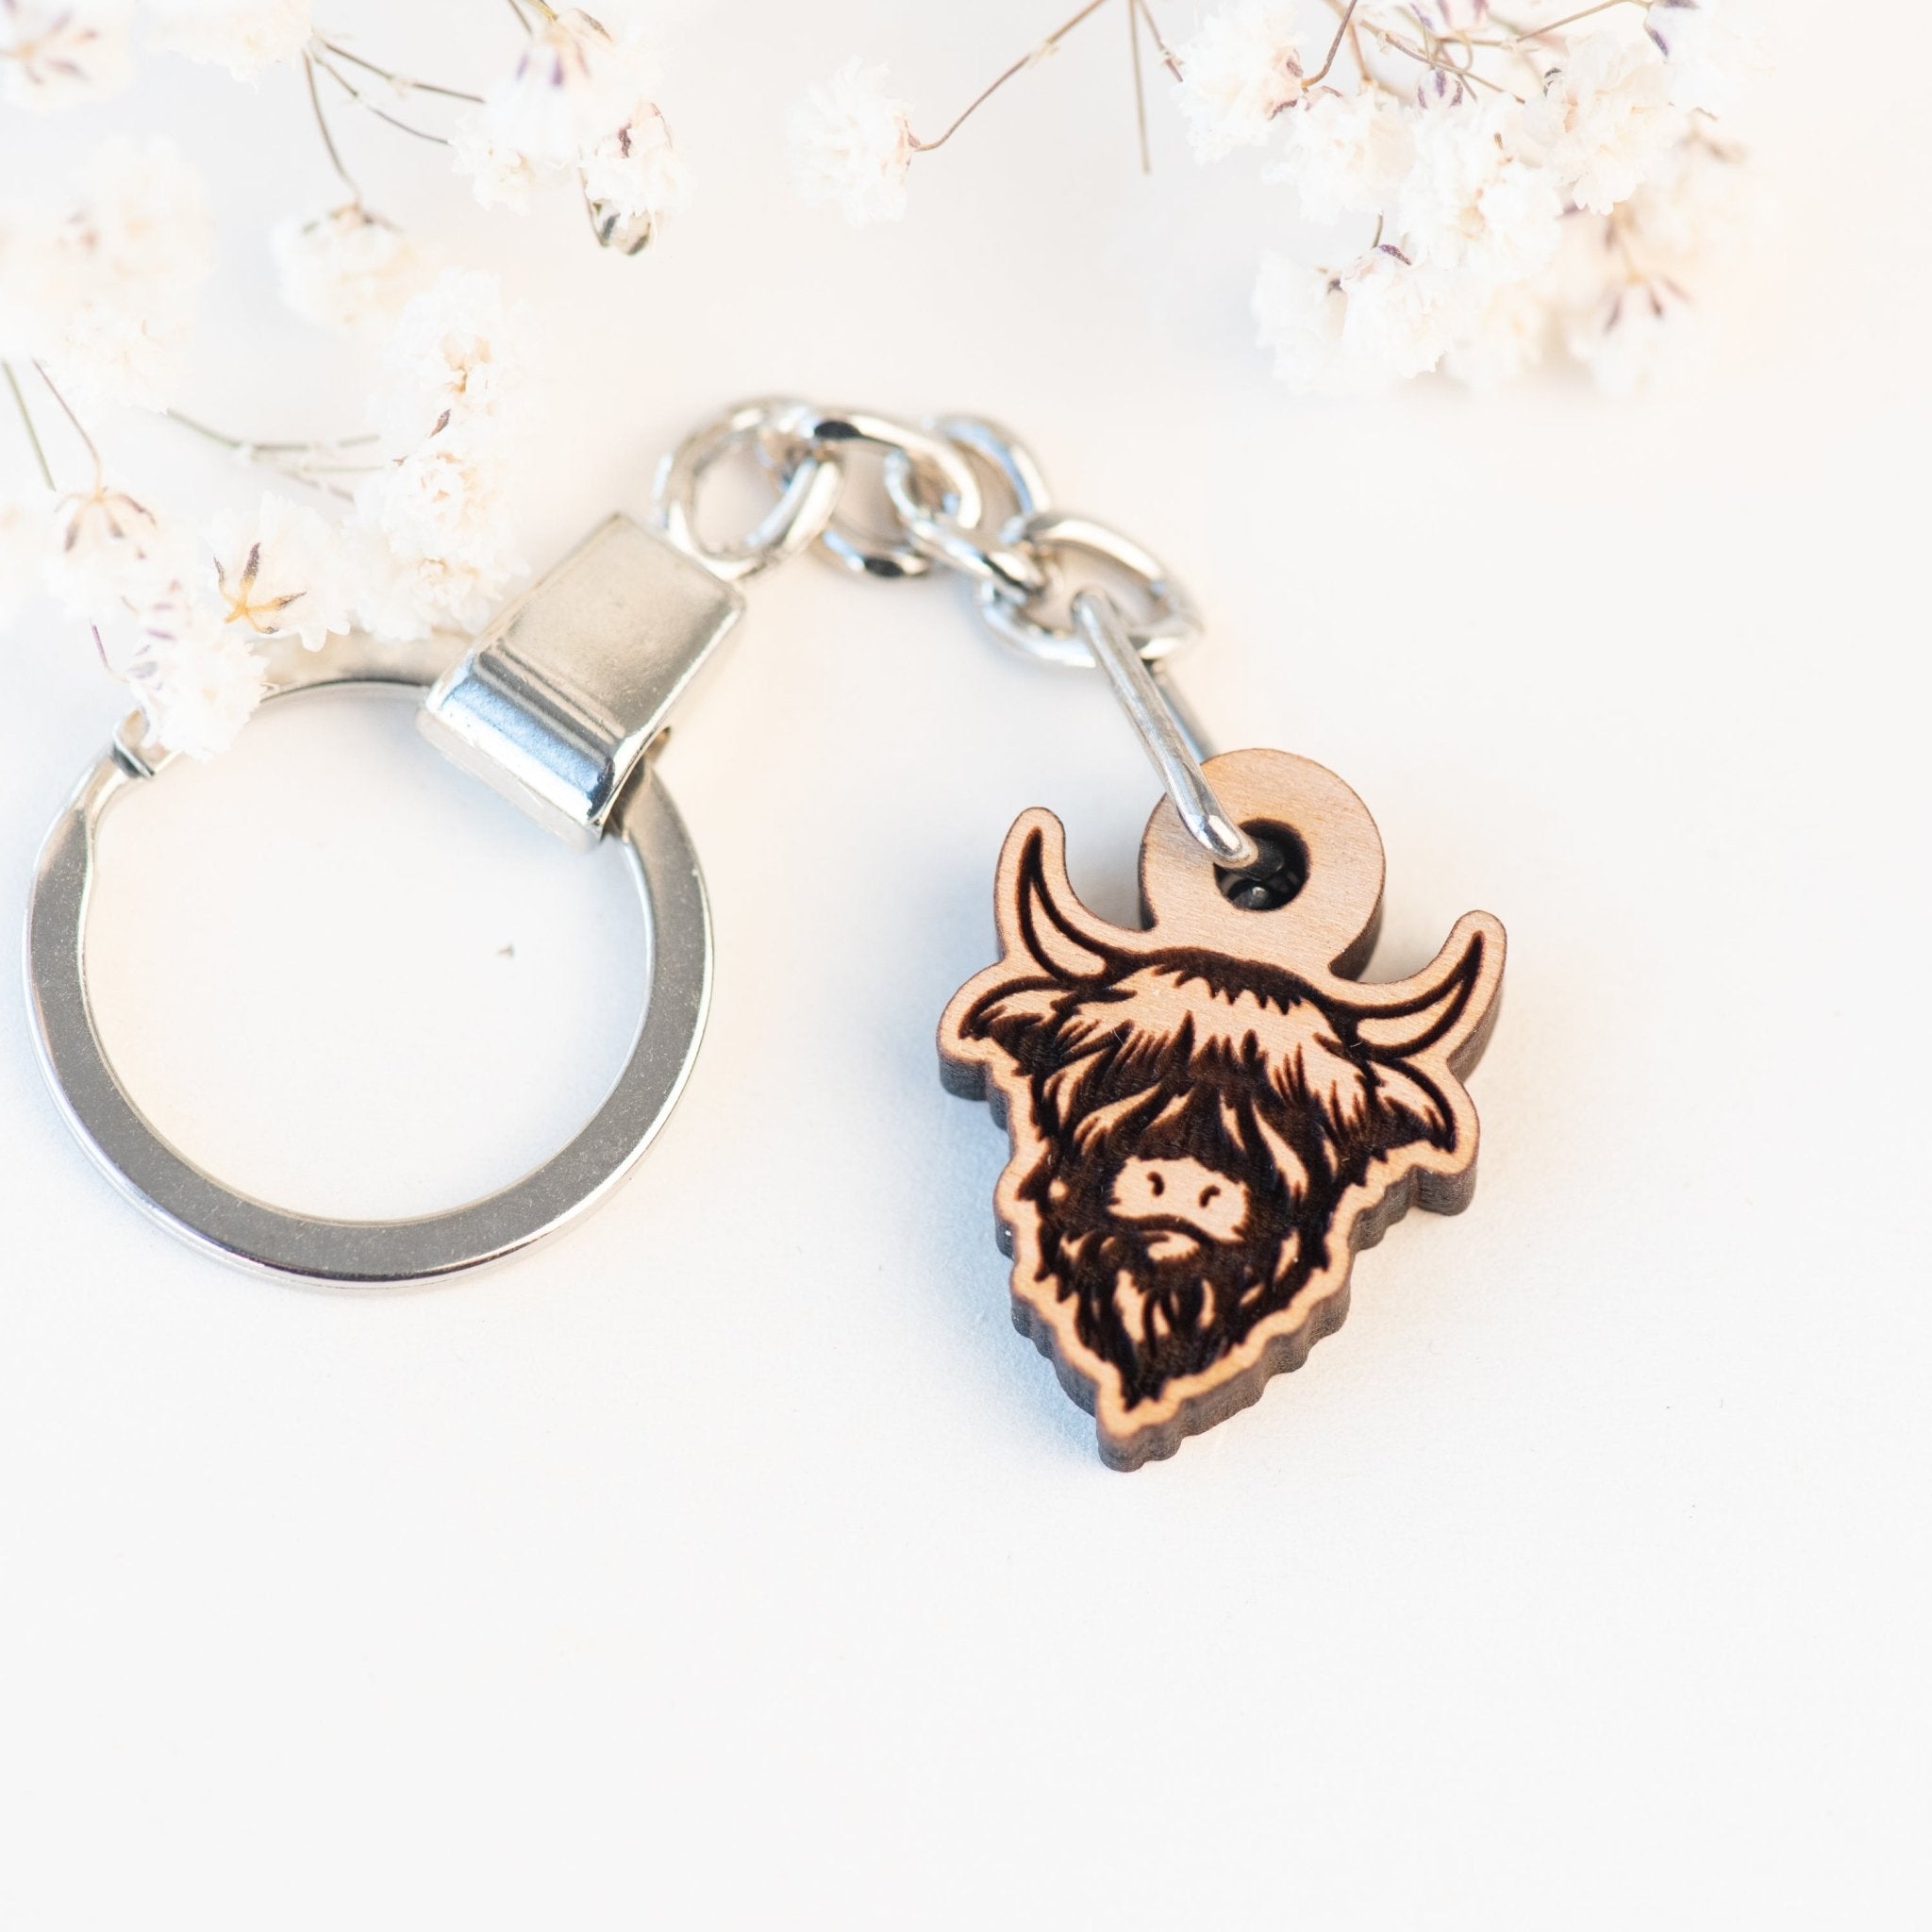 Highland Cow Cherry Wood Keyring - KL20005 - Robin Valley Official Store